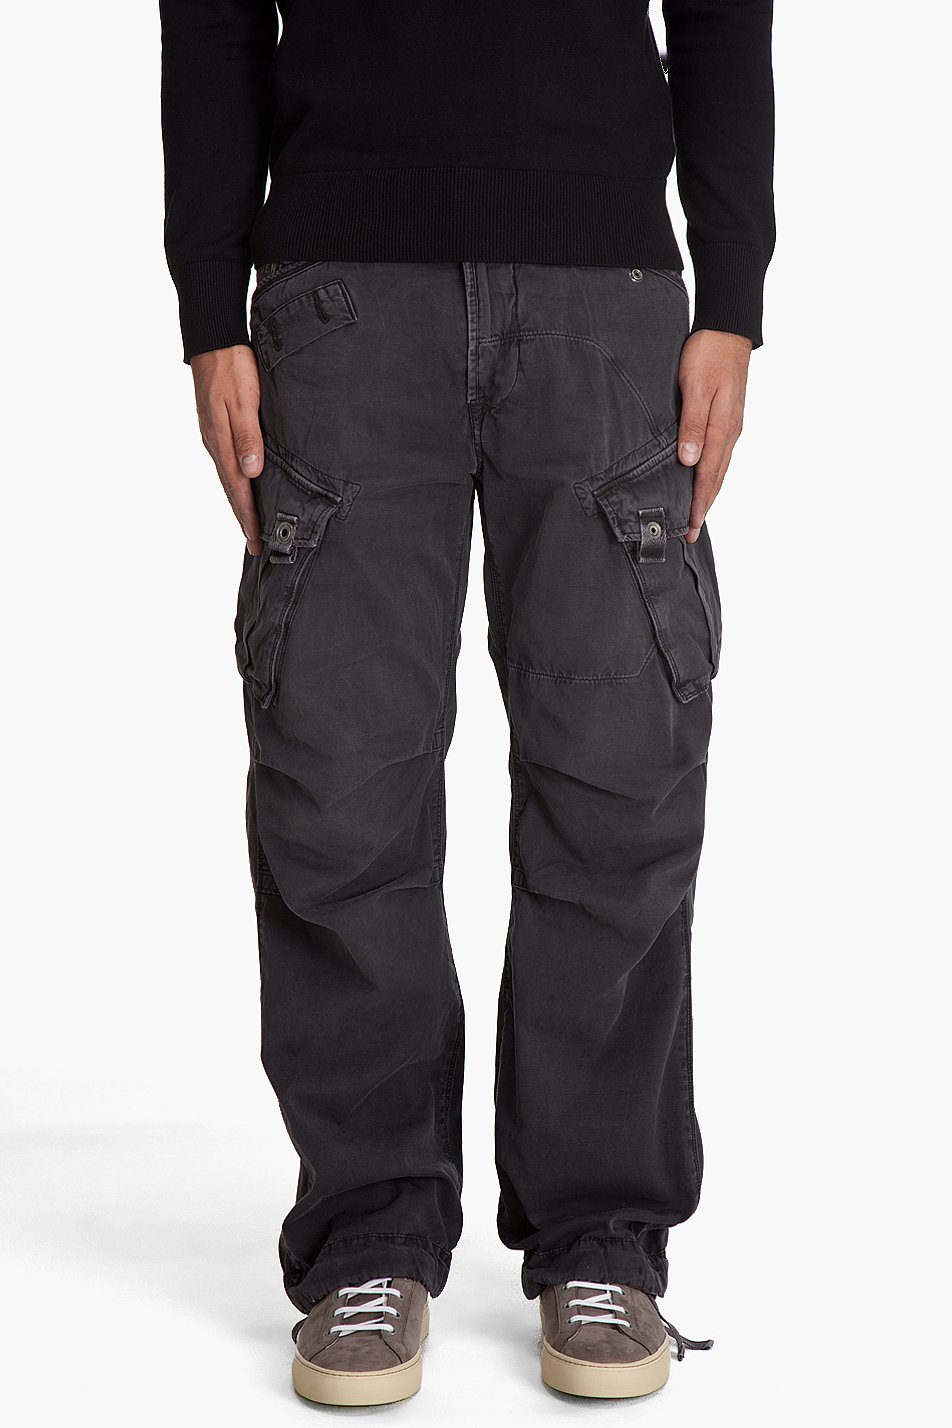 G-Star RAW Rovic Loose Cargo Pants in Black for Men - Lyst